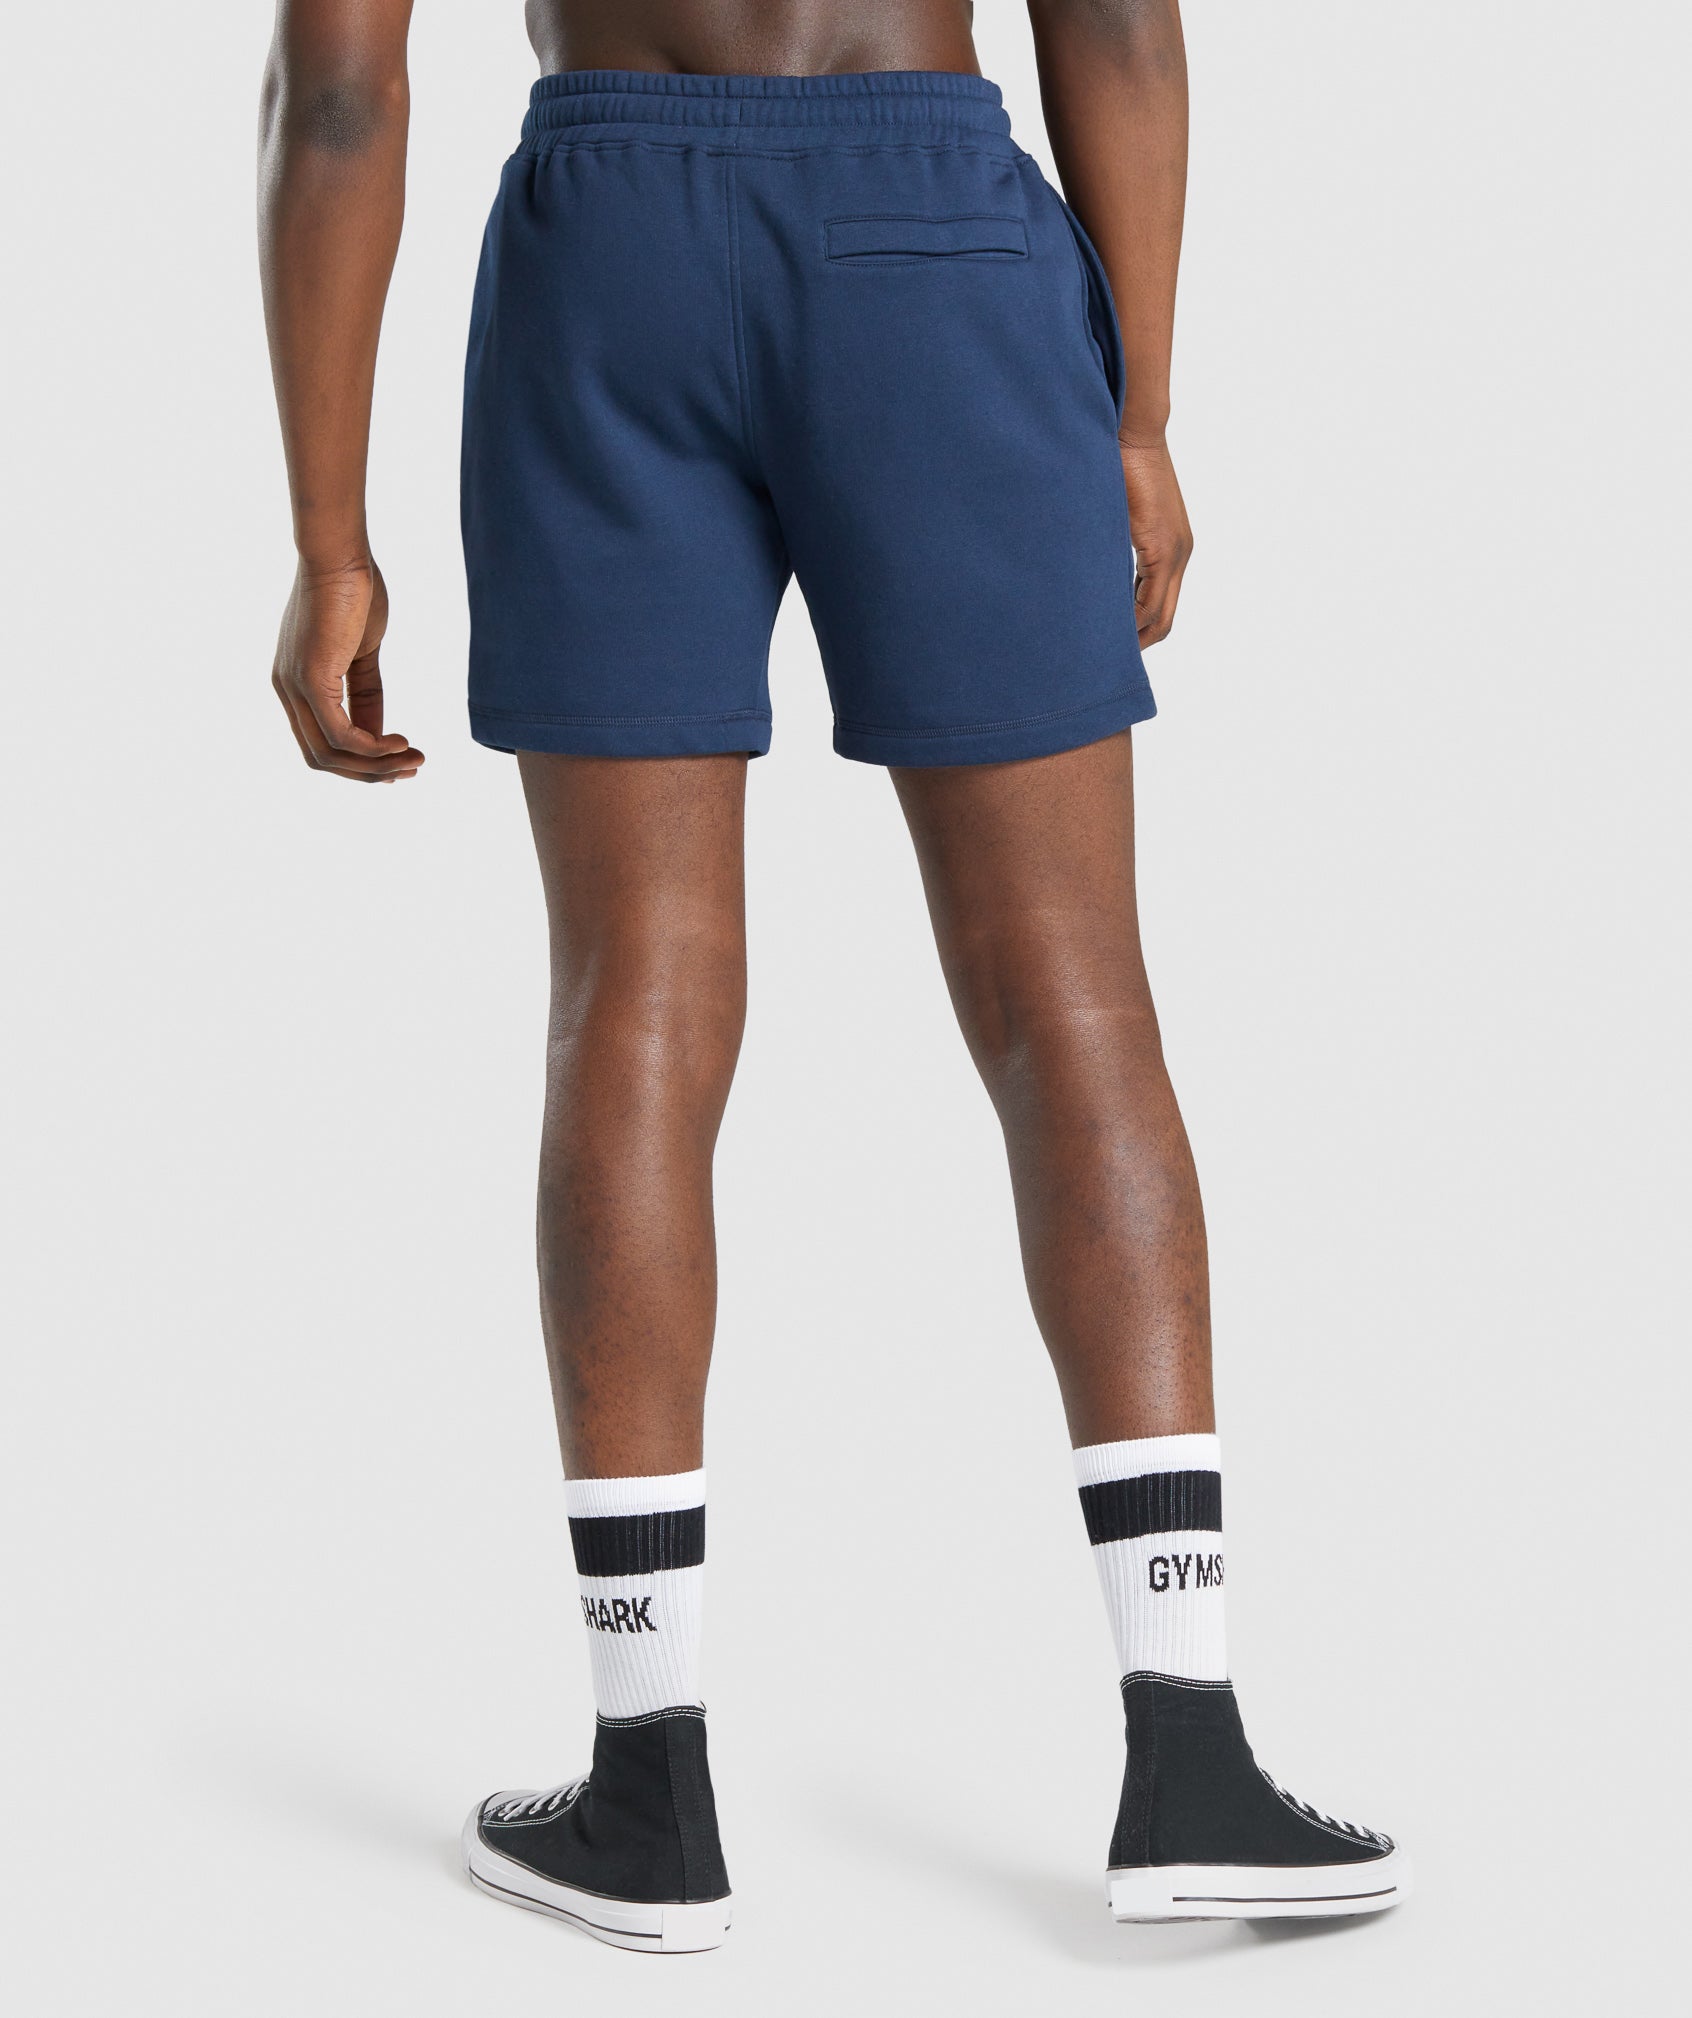 Crest Shorts in Navy - view 3